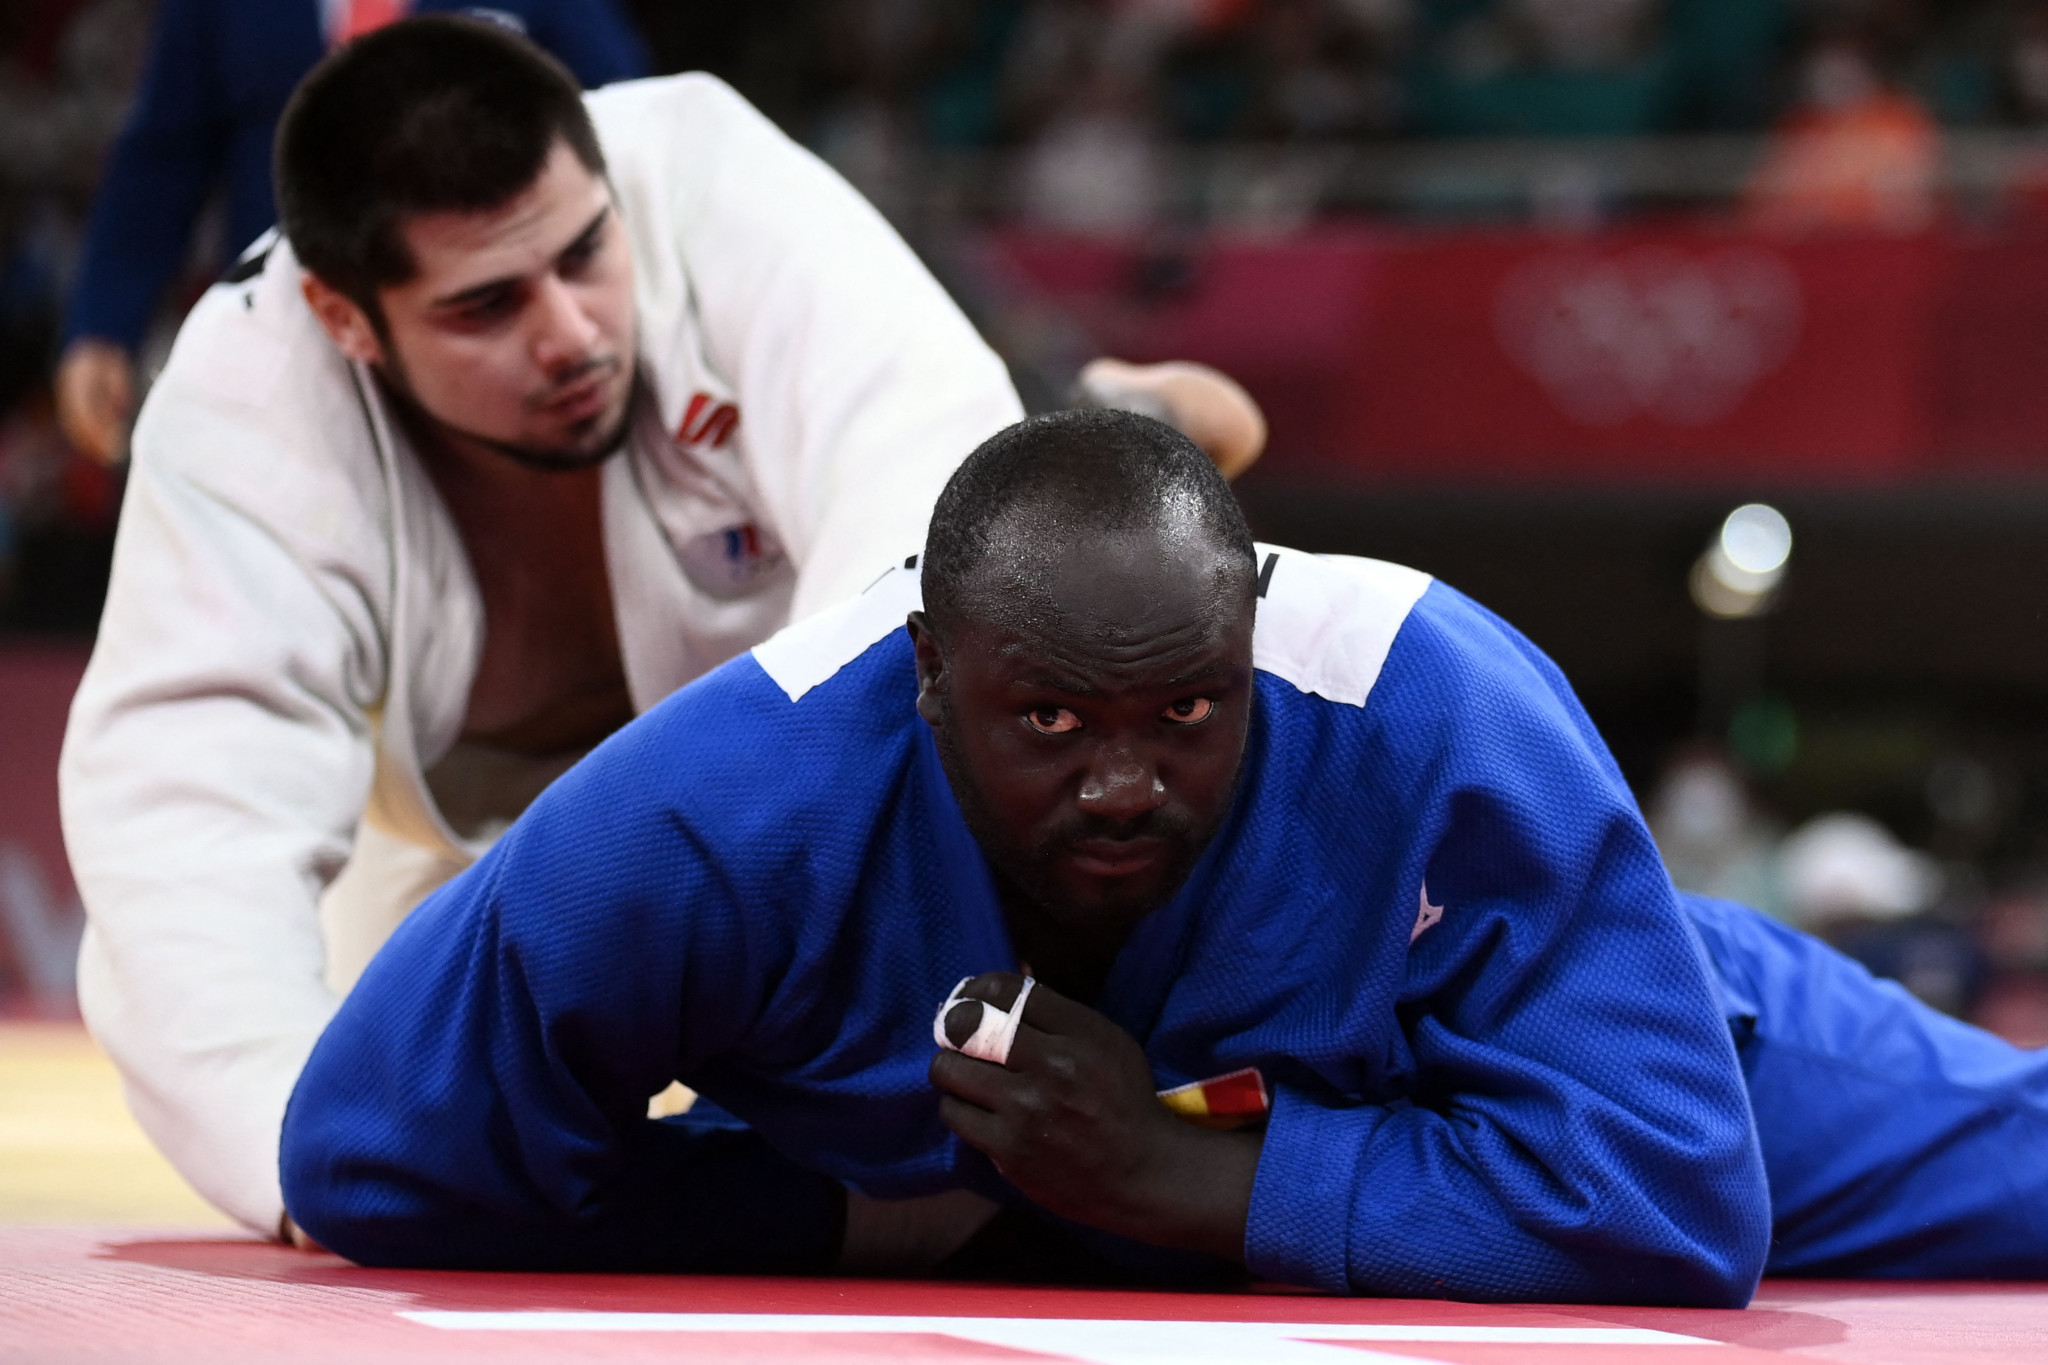 Mbagnick Ndiaye, in blue, is the highest-ranked man at the upcoming African Judo Championships ©Getty Images